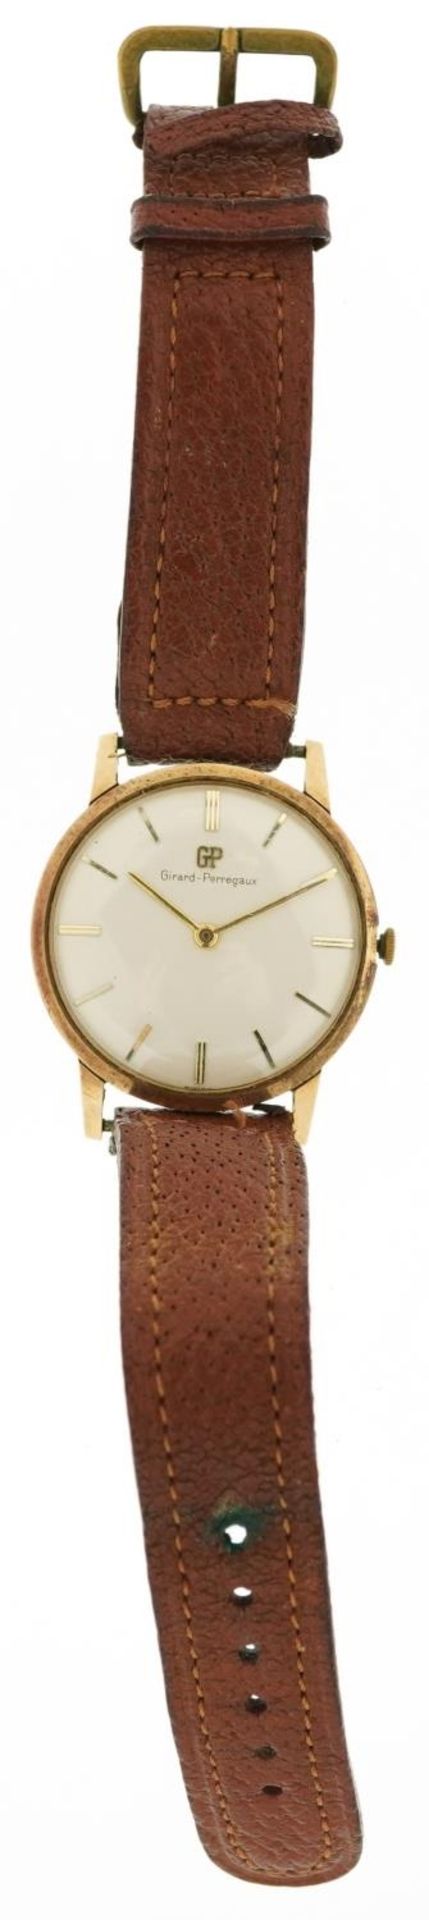 Girard Perregaux, gentlemen's 9ct gold manual wind wristwatch, the movement numbered 2529712, 32mm - Image 2 of 6